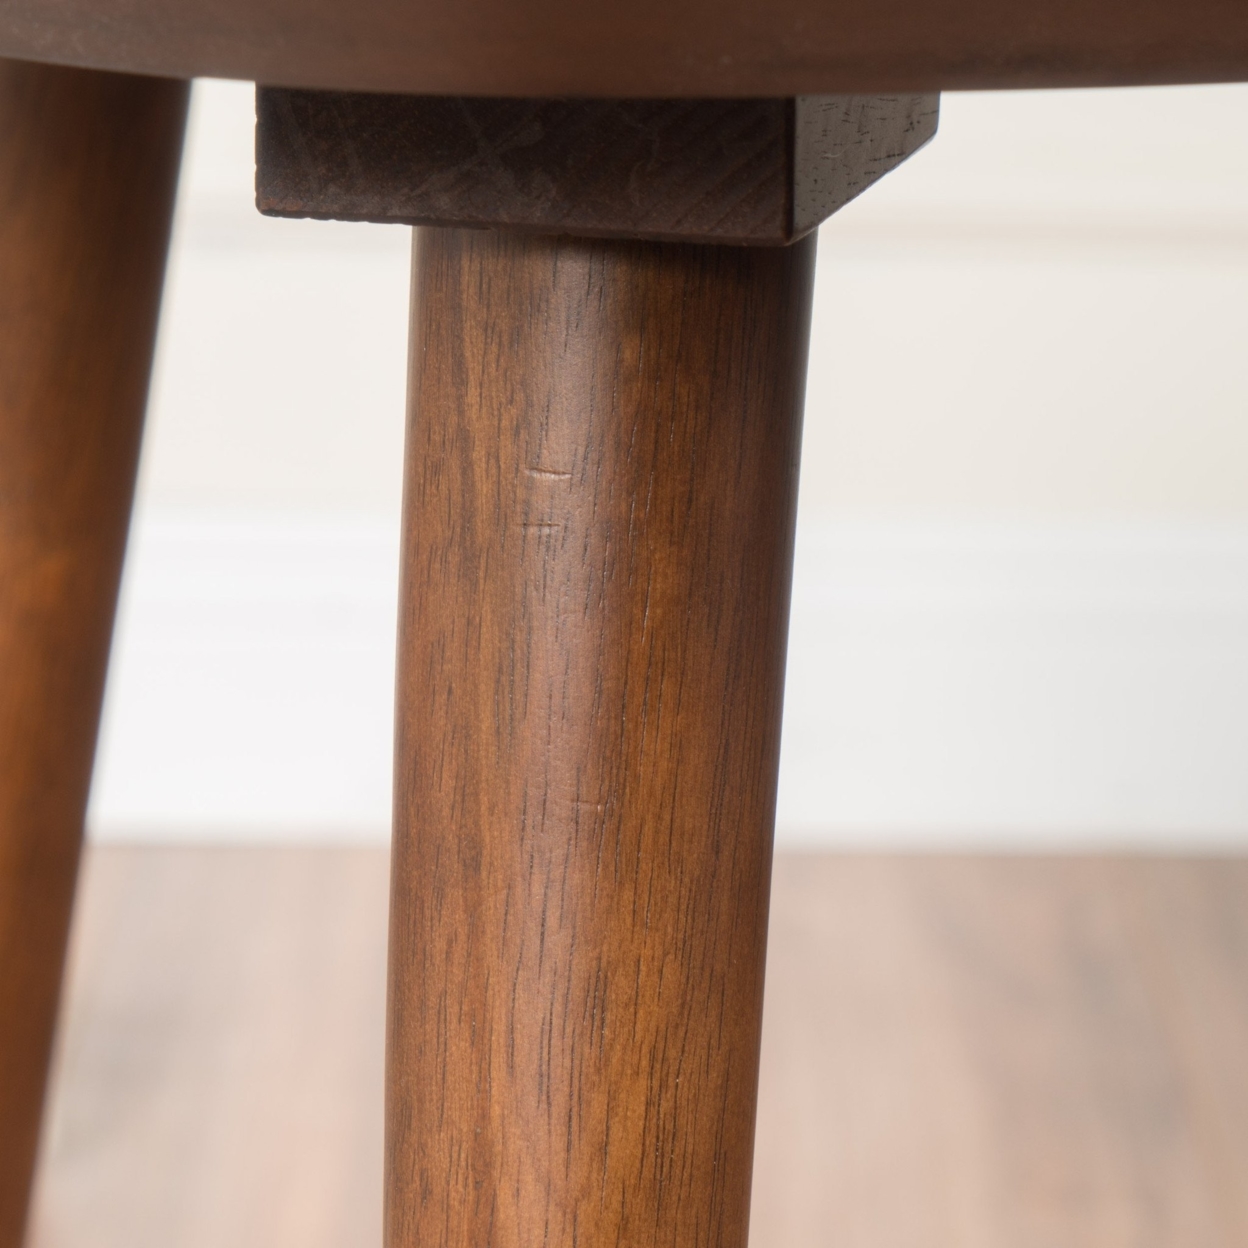 Finnian Wood Finish End Table - Natural